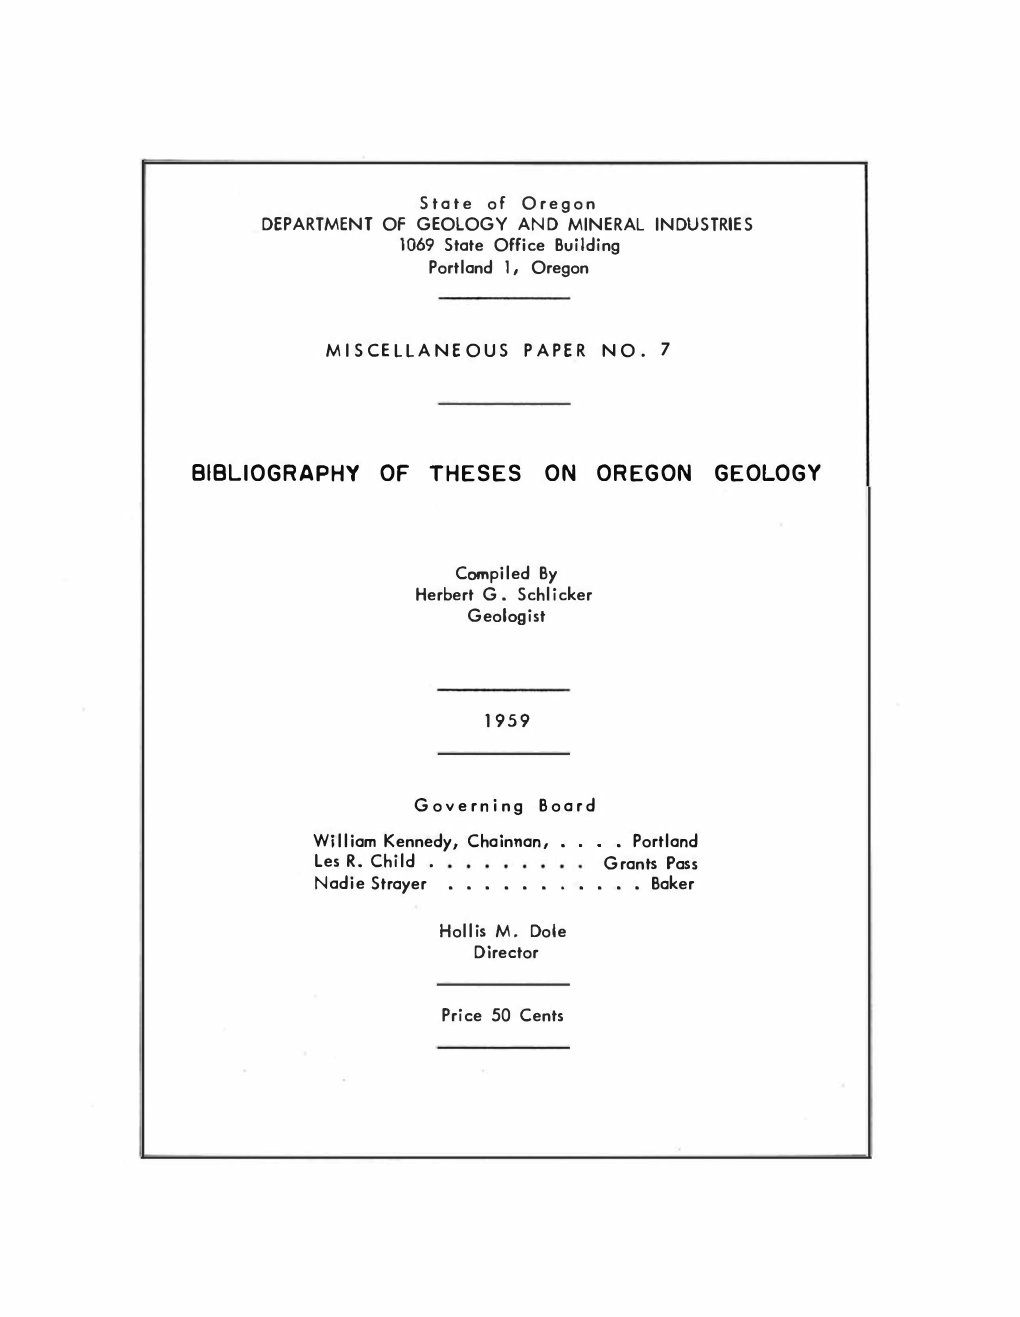 DOGAMI MP-7, Bibliography of Theses and Dissertations on Oregon Geology